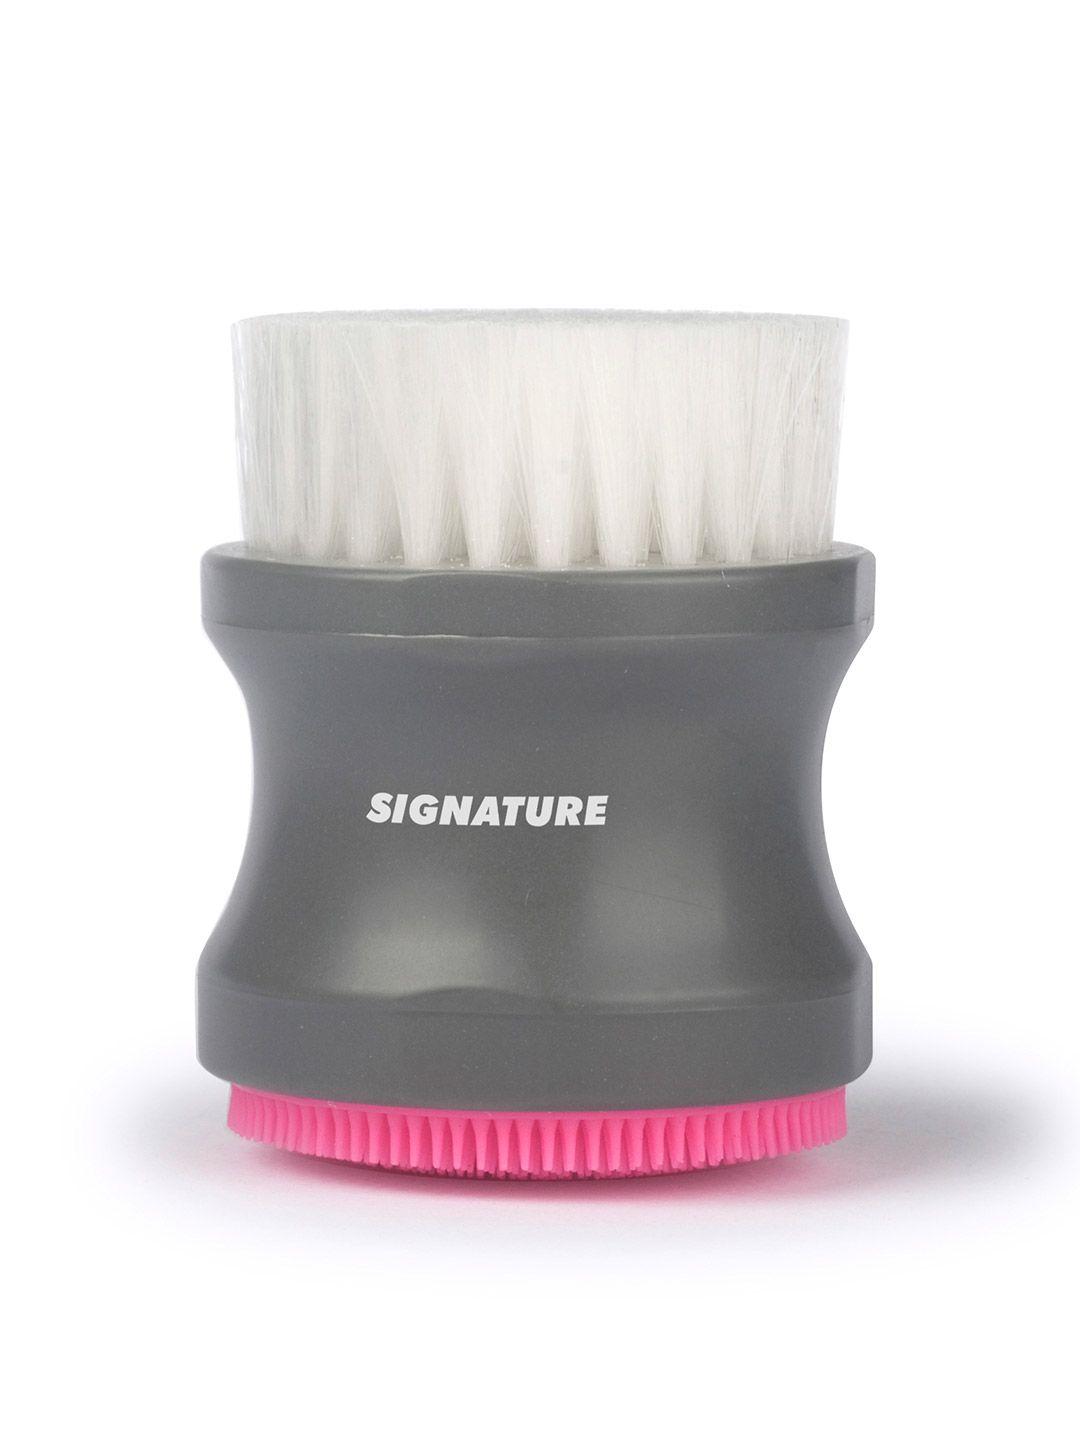 basicare signature compact duo facial cleansing brush